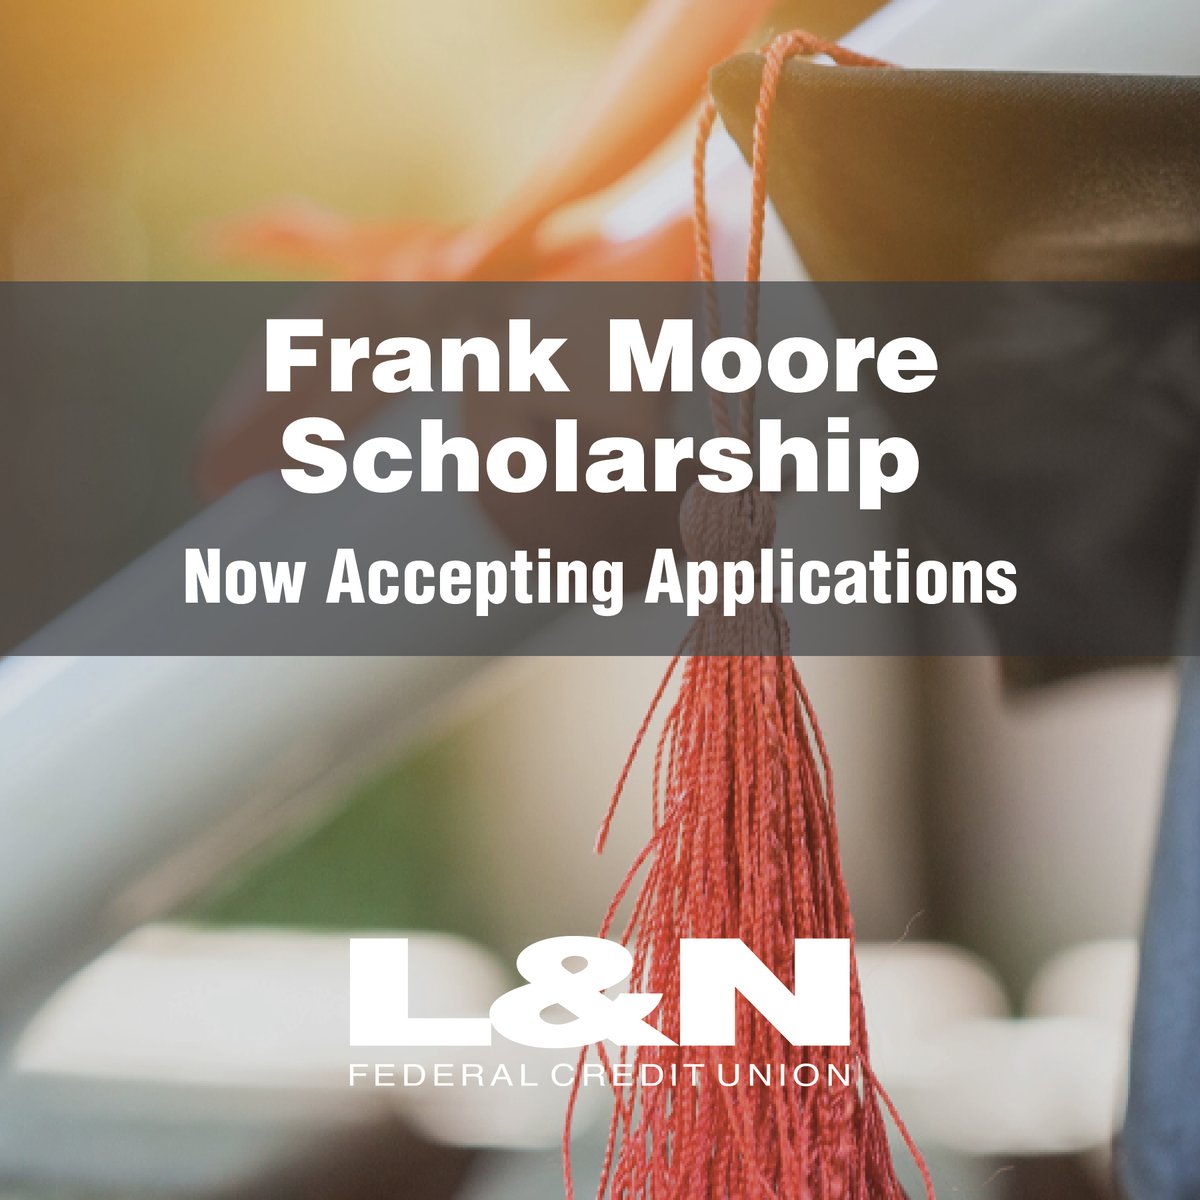 We are now accepting applications for the Frank H. Moore Scholarship. To learn more please visit: LNFCU.com/frank-moore-sc…